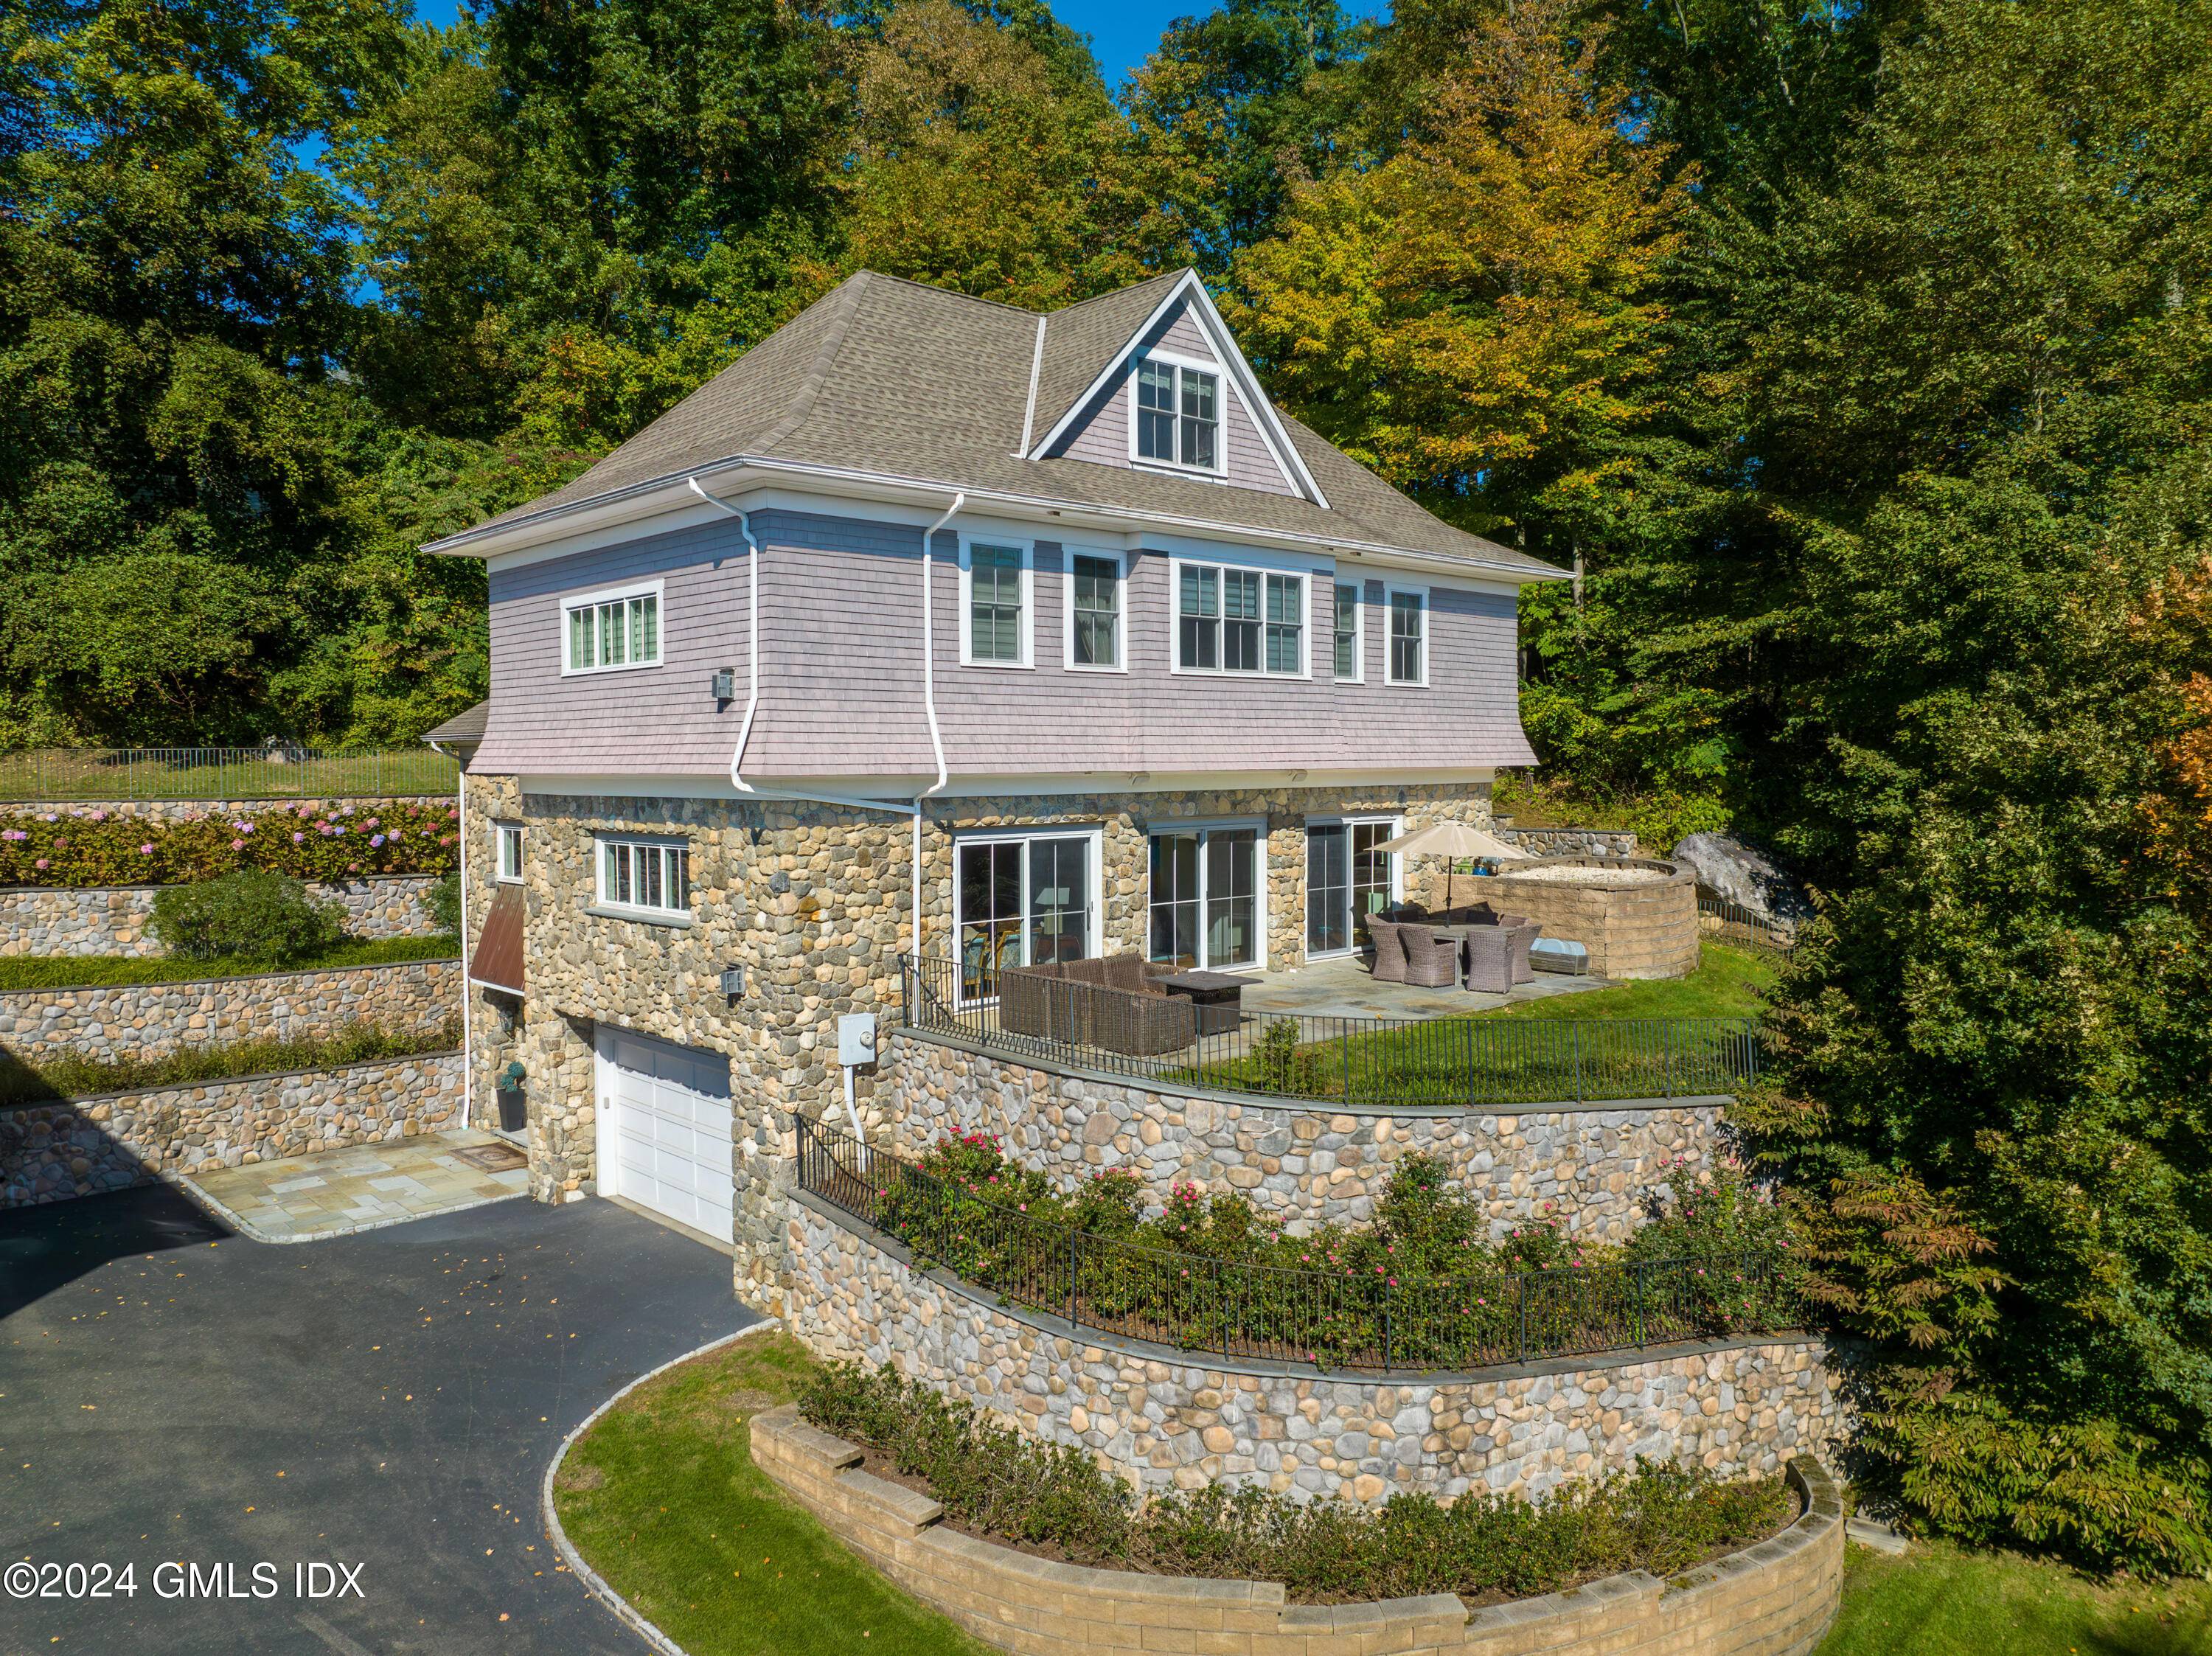 This impeccably maintained residence, crafted with stone and shingle, graces a spacious.